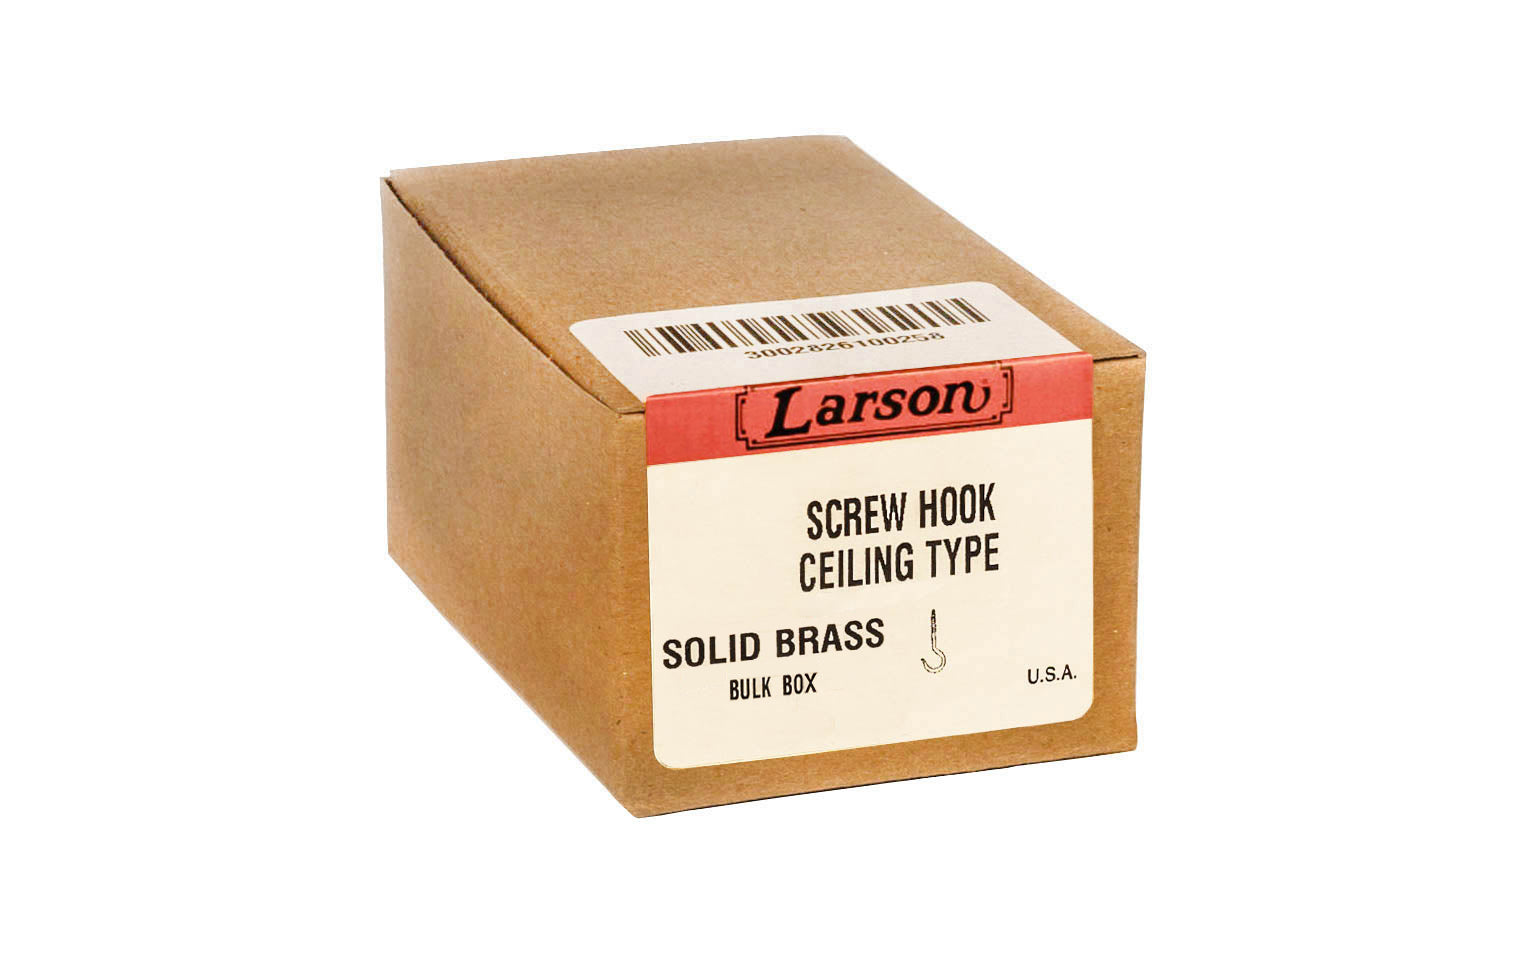 Bulk Box of Solid Brass Ceiling Hooks - Made in USA